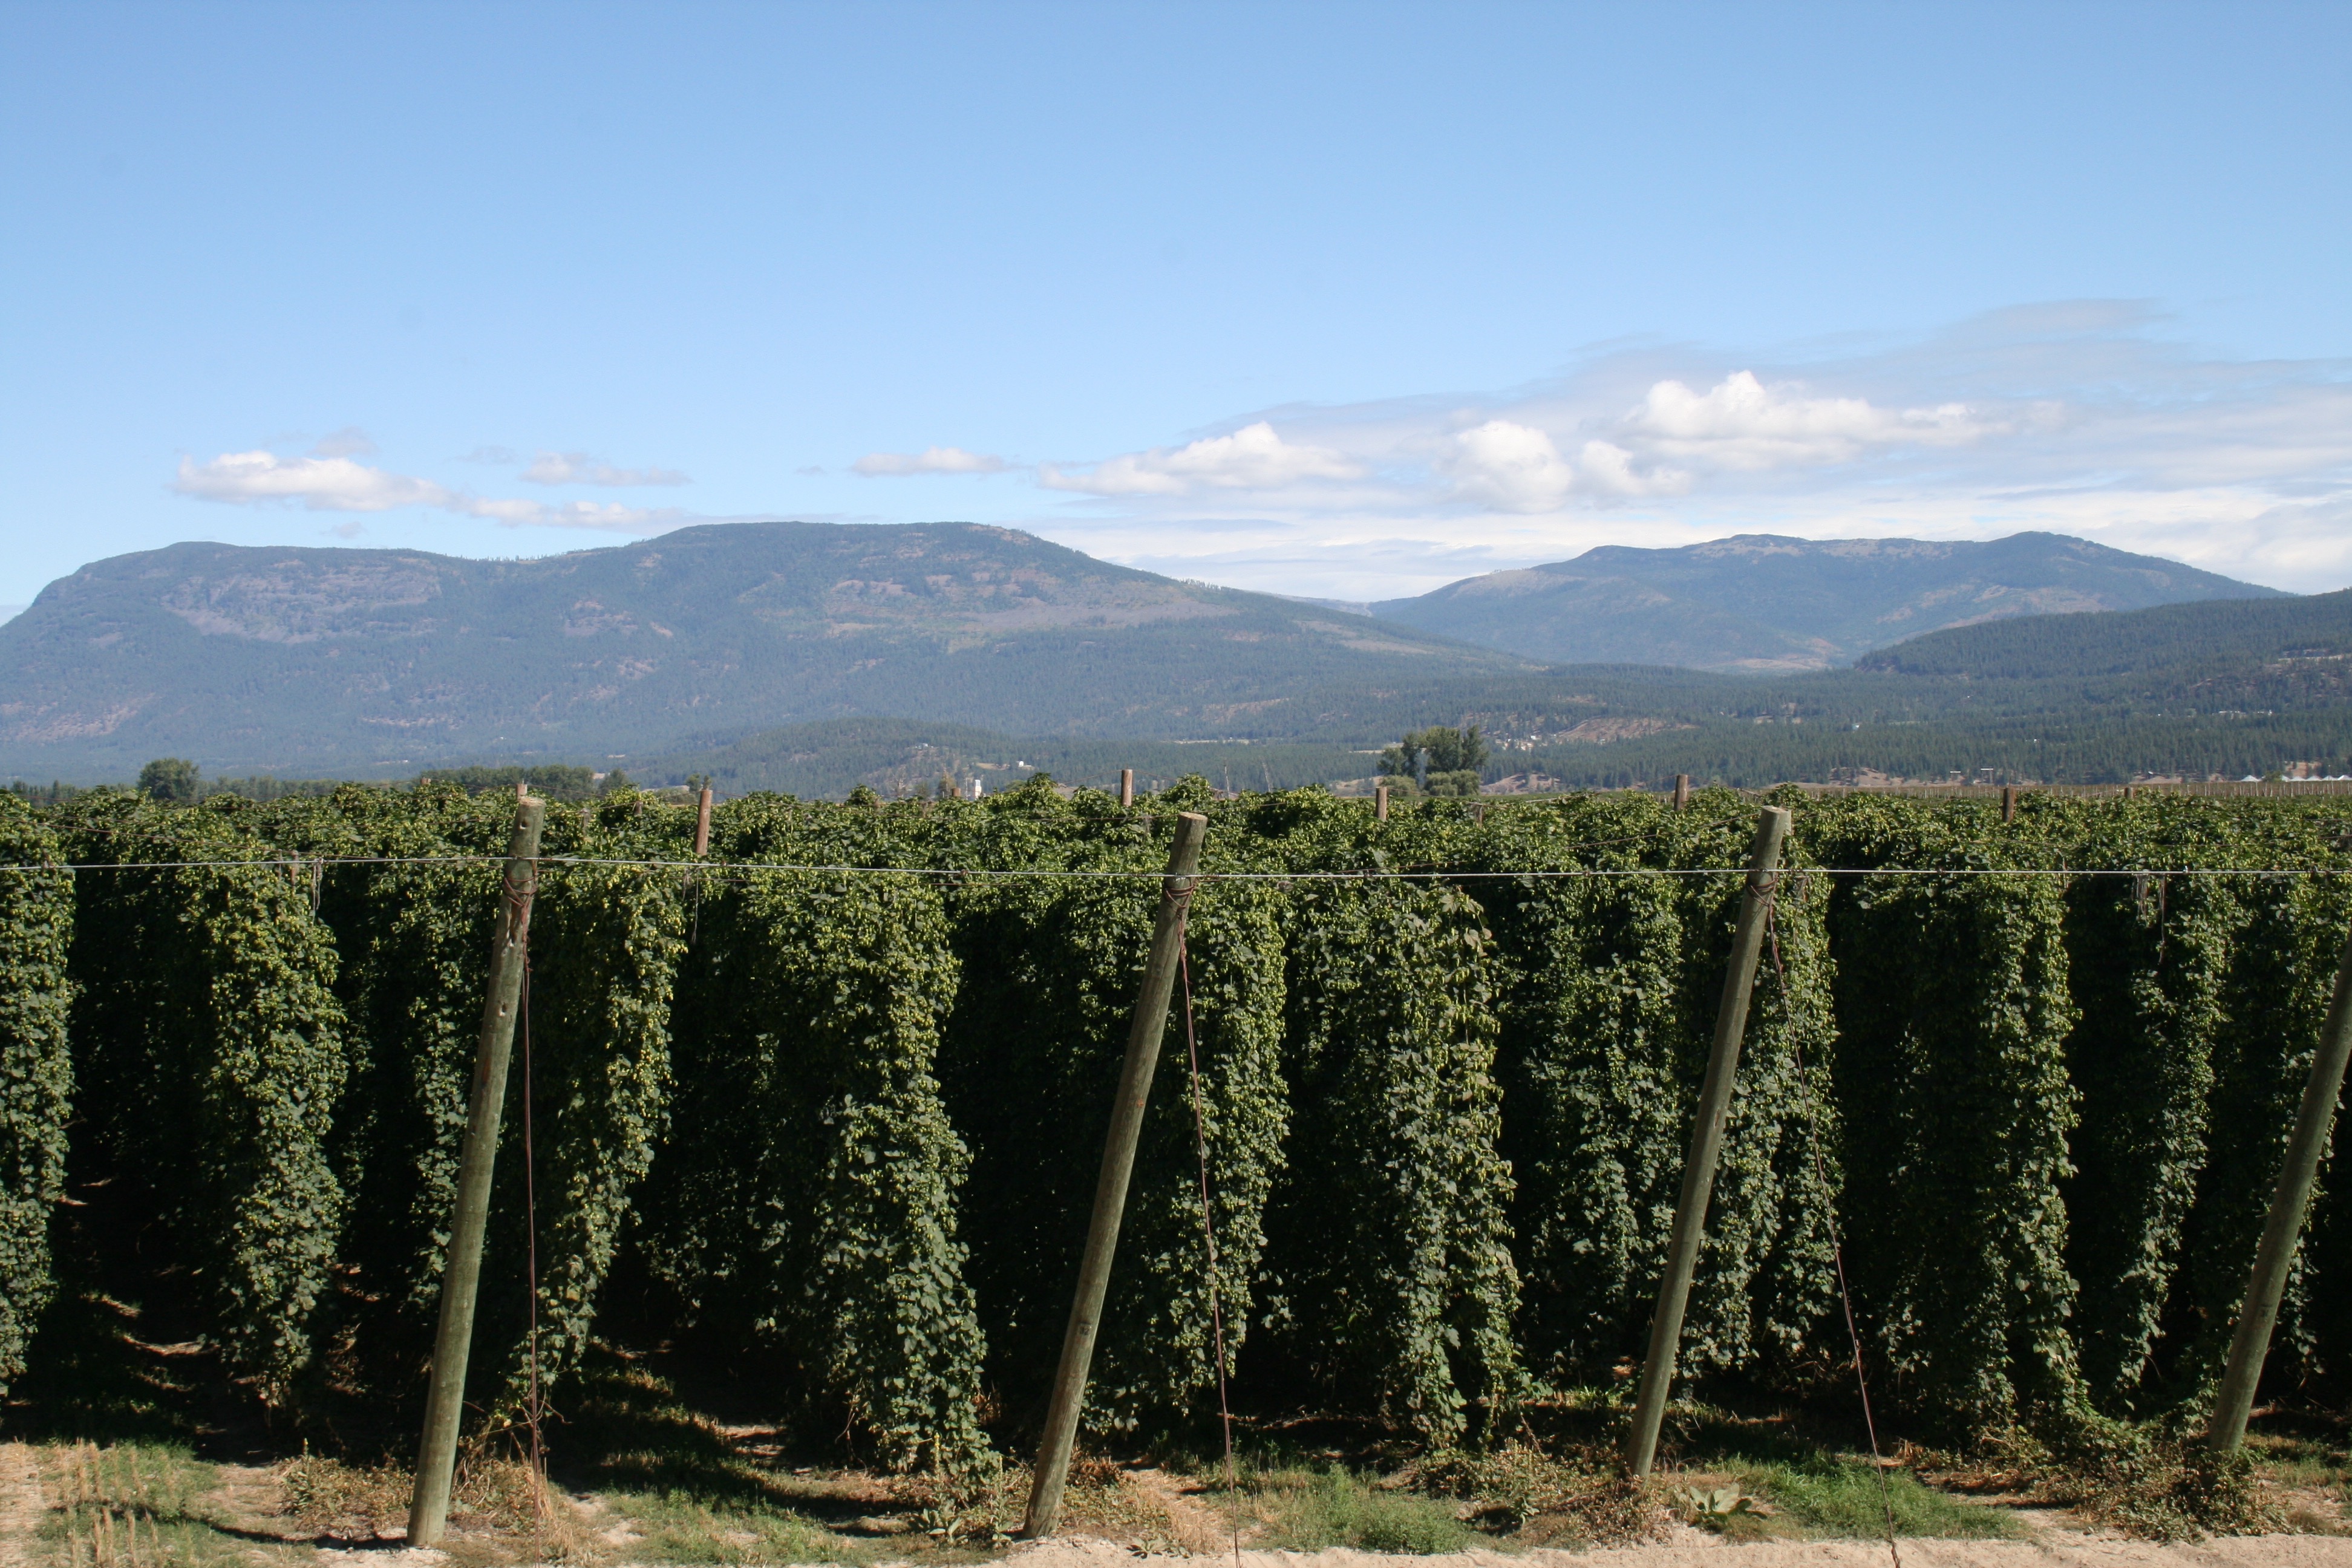 The hops seem to go on forever at Elk Mountain Farms in Bonners Ferry, Idaho.